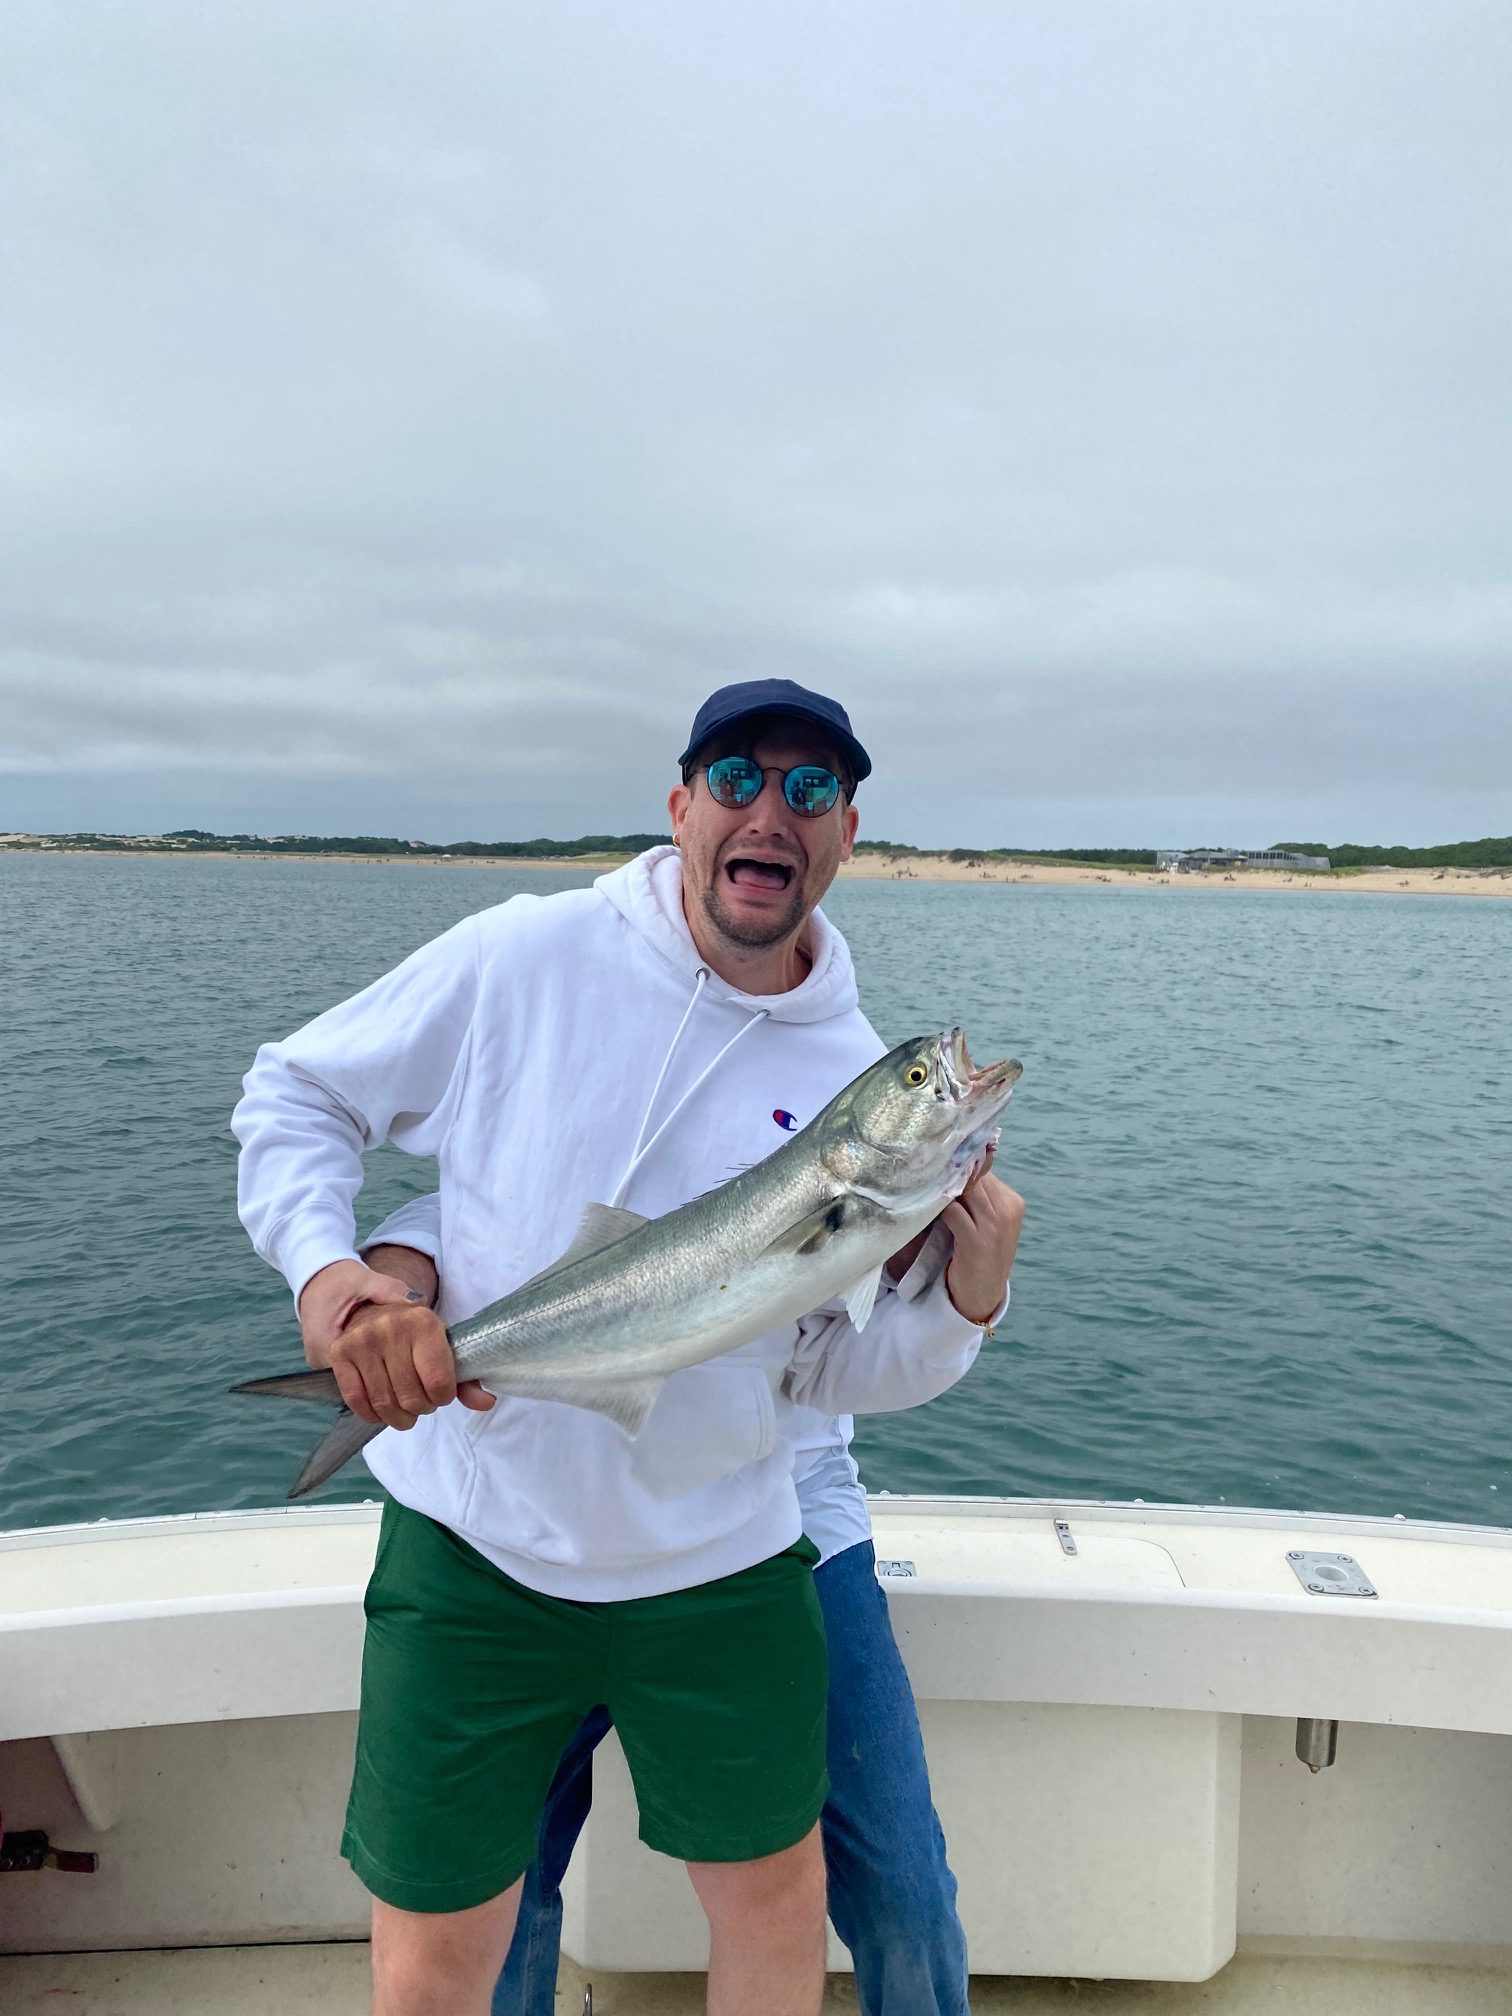 Customer holding a fish caught on the Beth Ann of Race Point in Provincetown